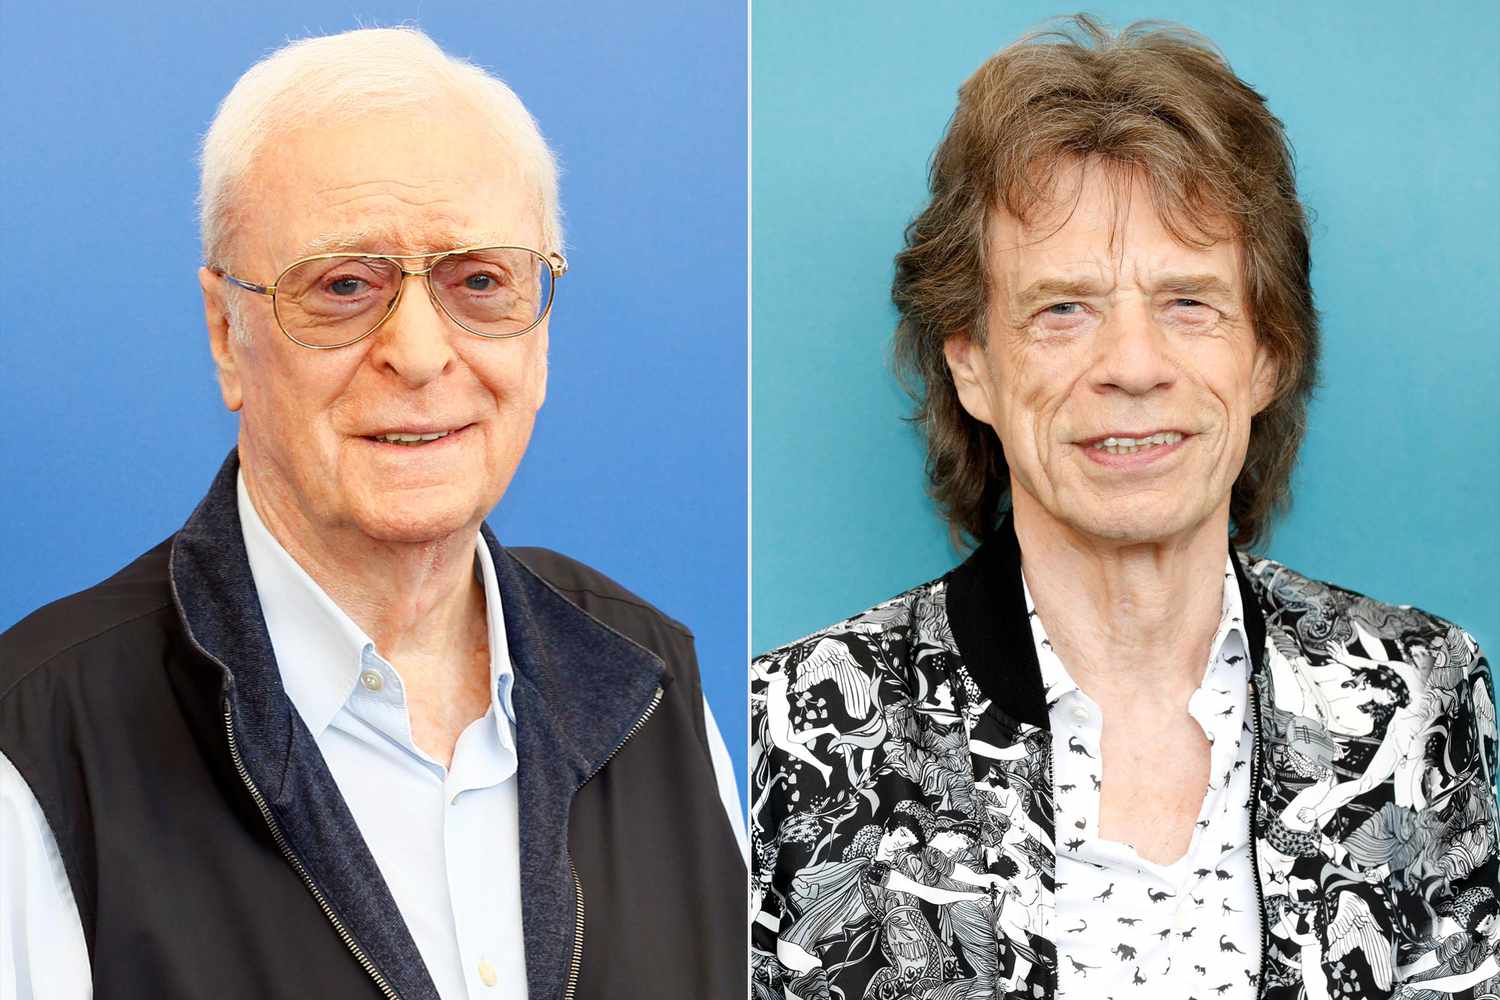 Michael Caine attends the 'My Generation' photocall during the 74th Venice Film Festival on September 5, 2017 in Venice, Italy. ; Mick Jagger attends the photo call for 'The Burnt Orange Heresy' during the 76th Venice Film Festival on September 7, 2019 in Venice, Italy. (Photo by Kurt Krieger/Corbis via Getty Images)